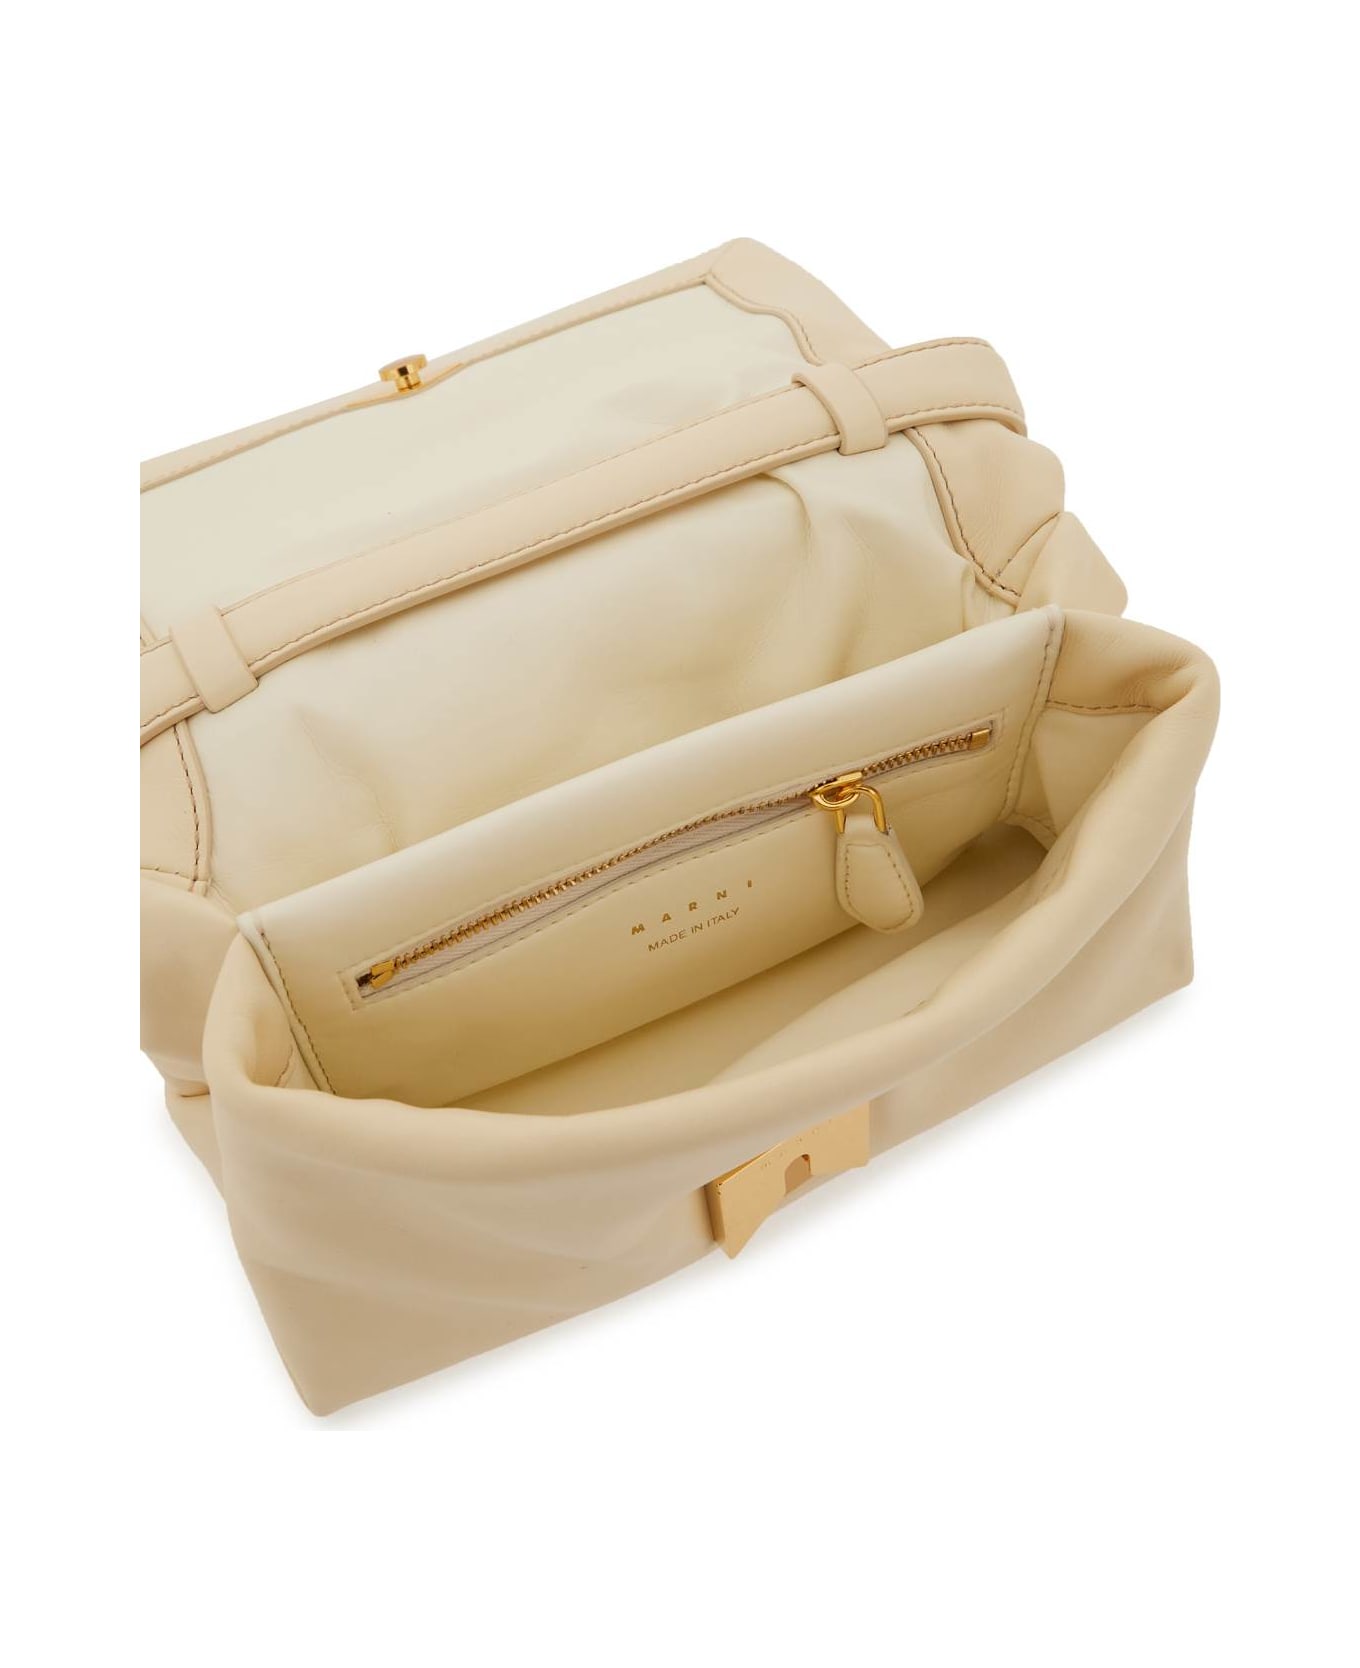 Marni Small Prisma Bag In Ivory Leather - IVORY